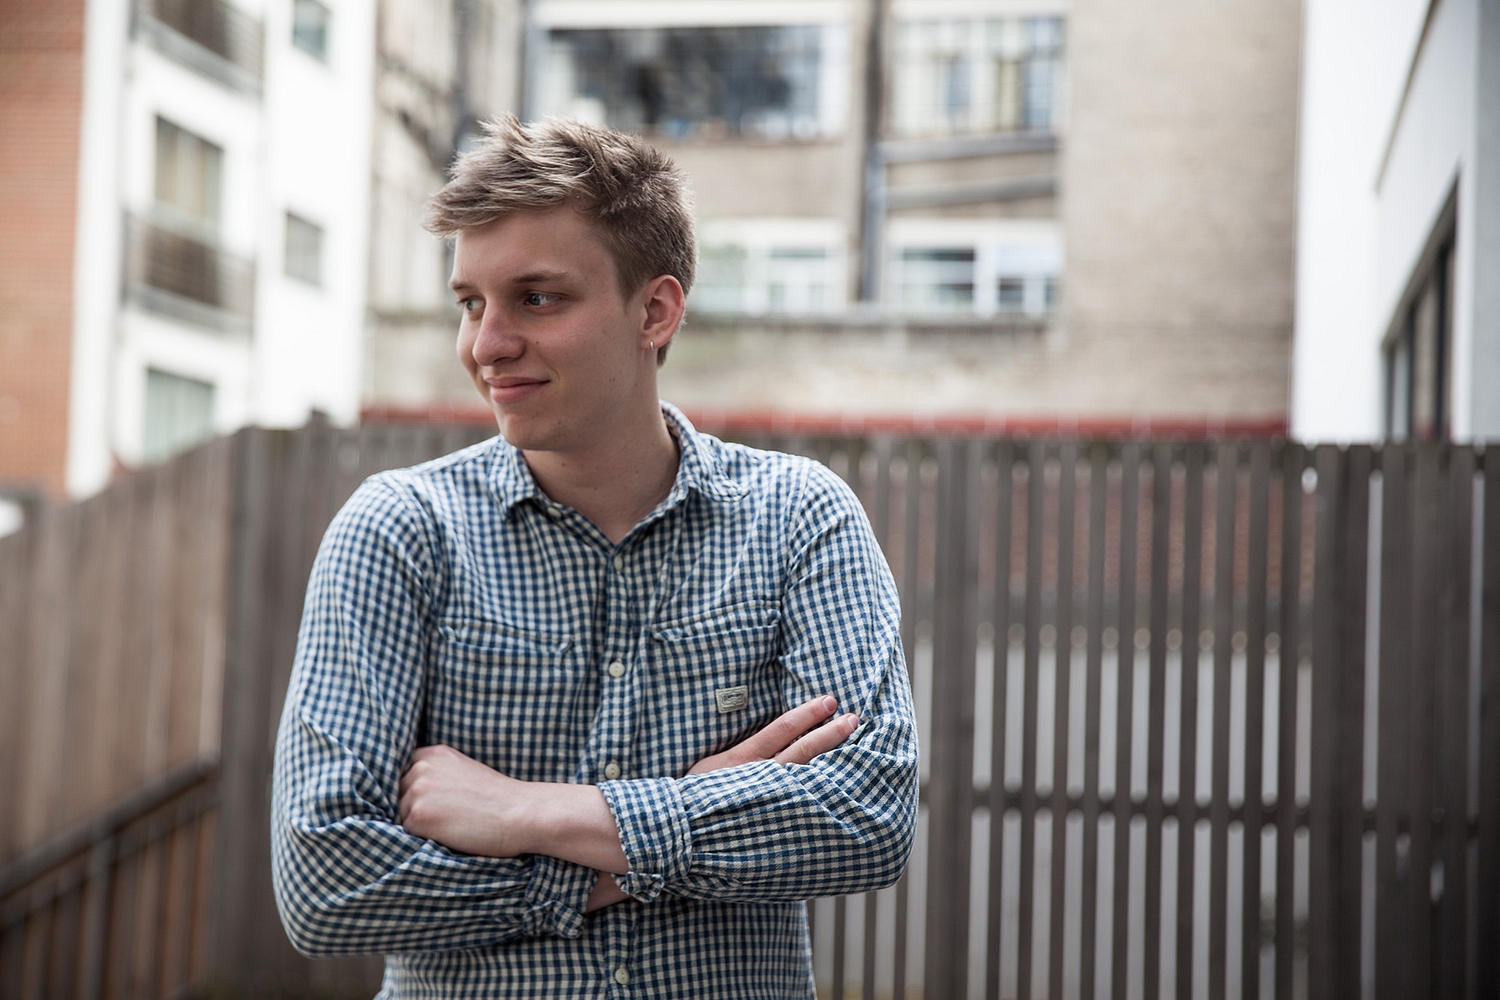 Watch George Ezra cover Bob Dylan’s ‘Girl From the North Country’